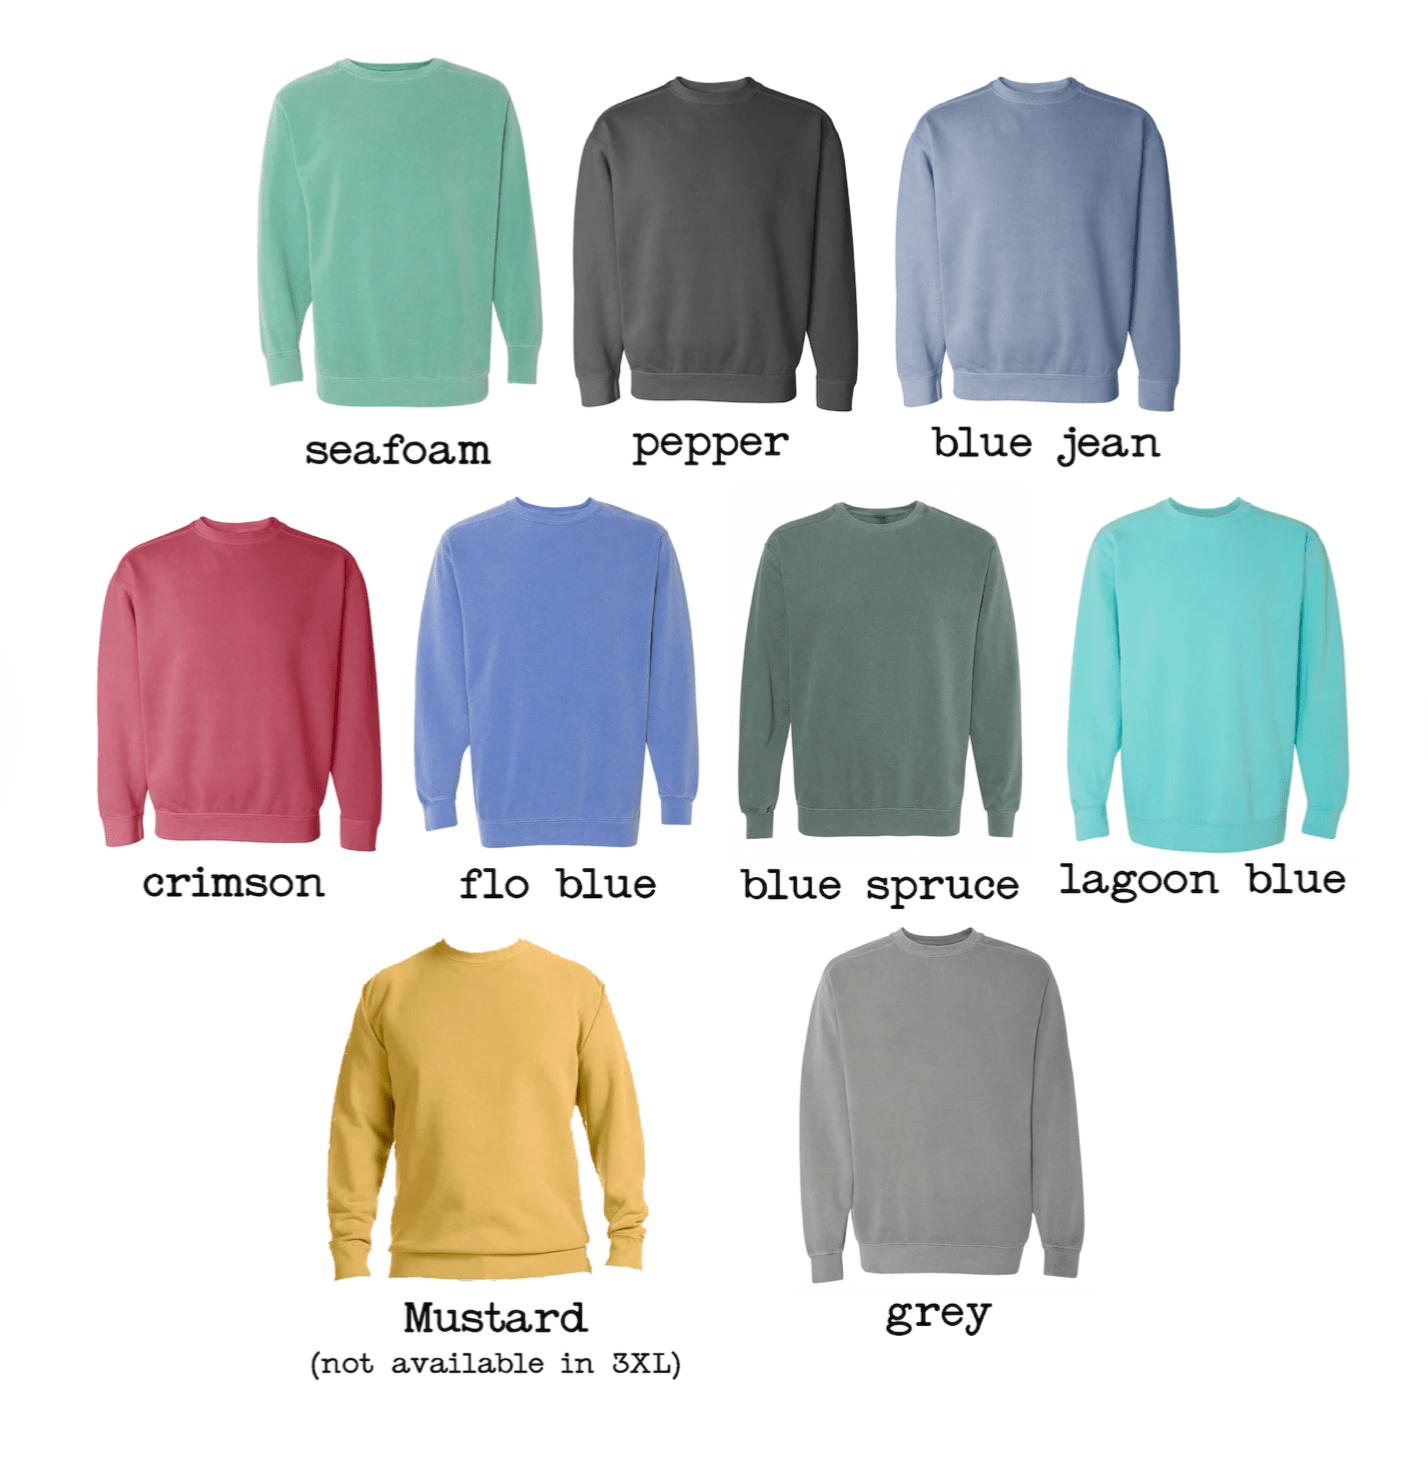 New Beautiful Reasons to be Happy Comfort Colors Crewneck Sweatshirt Pullover // You Pick Color // Size S-3XL